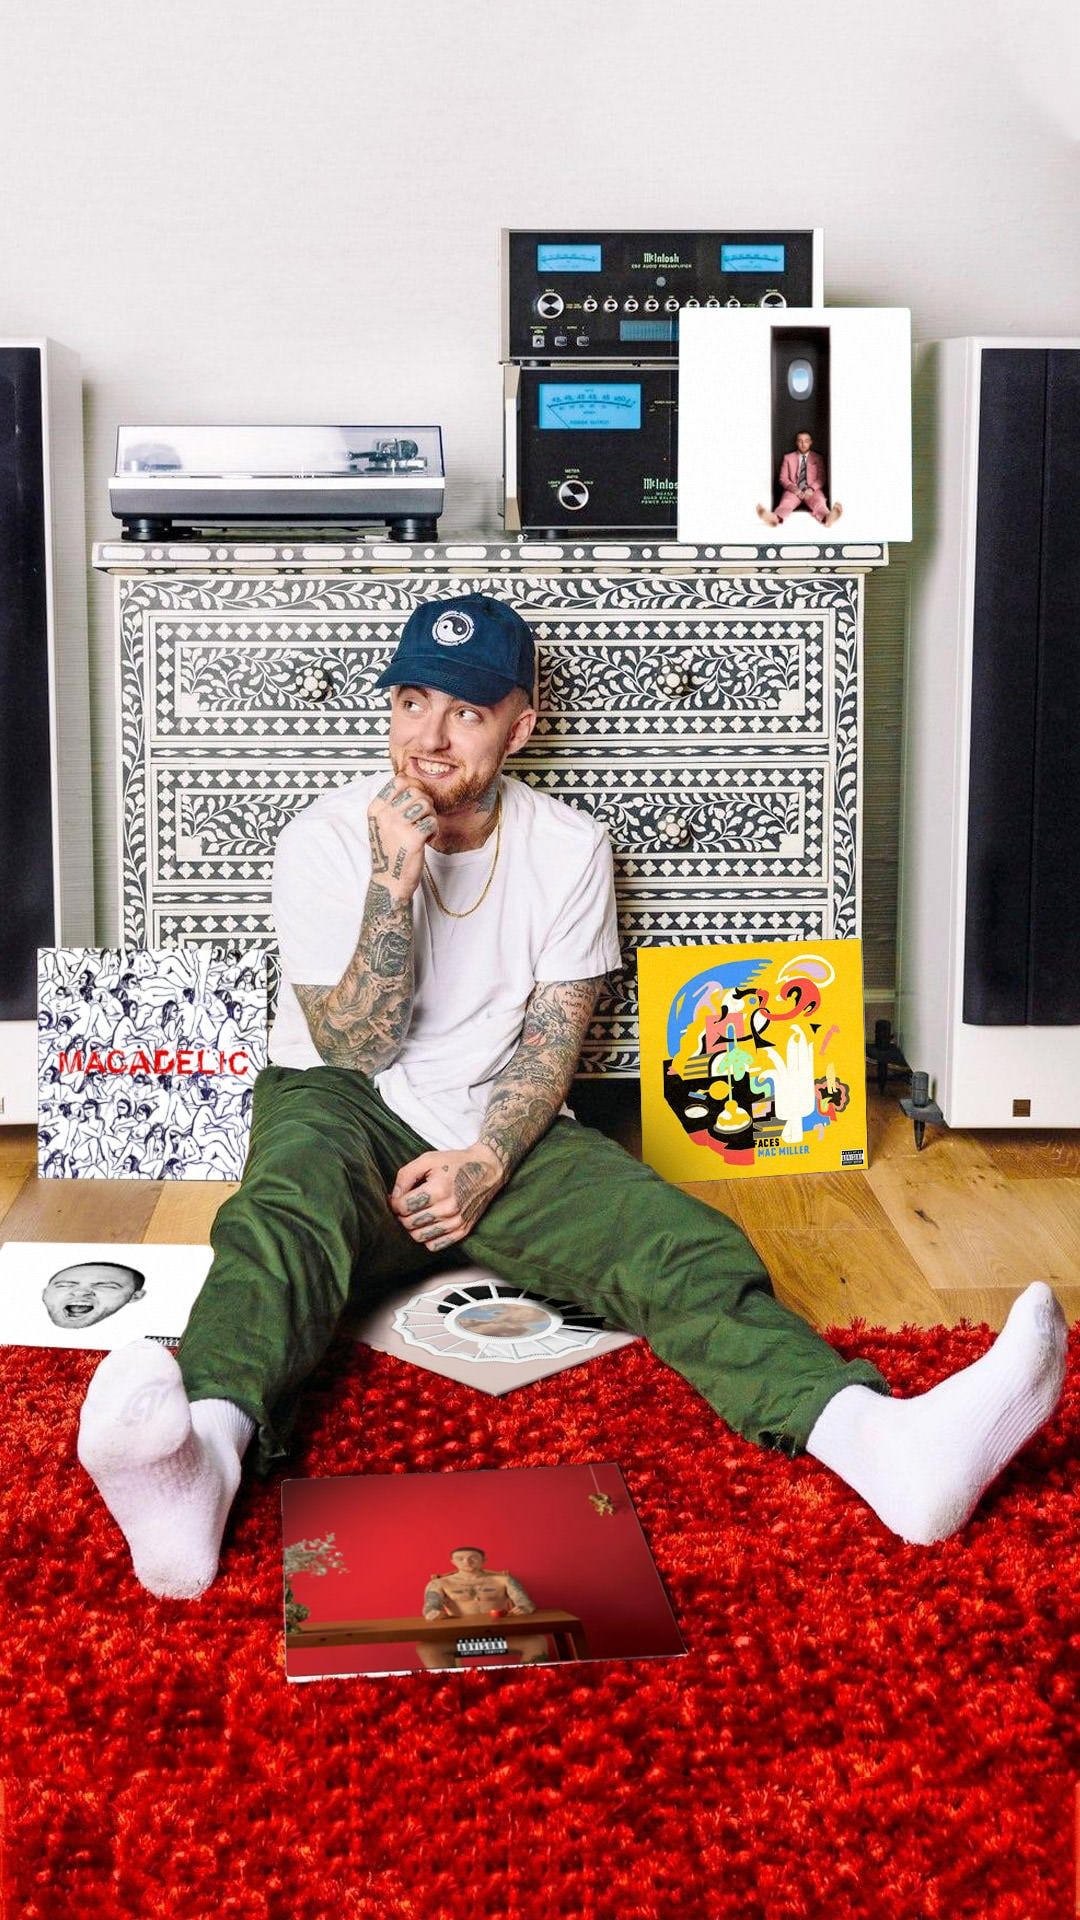 In love with ios16 wallpapers any more Mac ones  rMacMiller